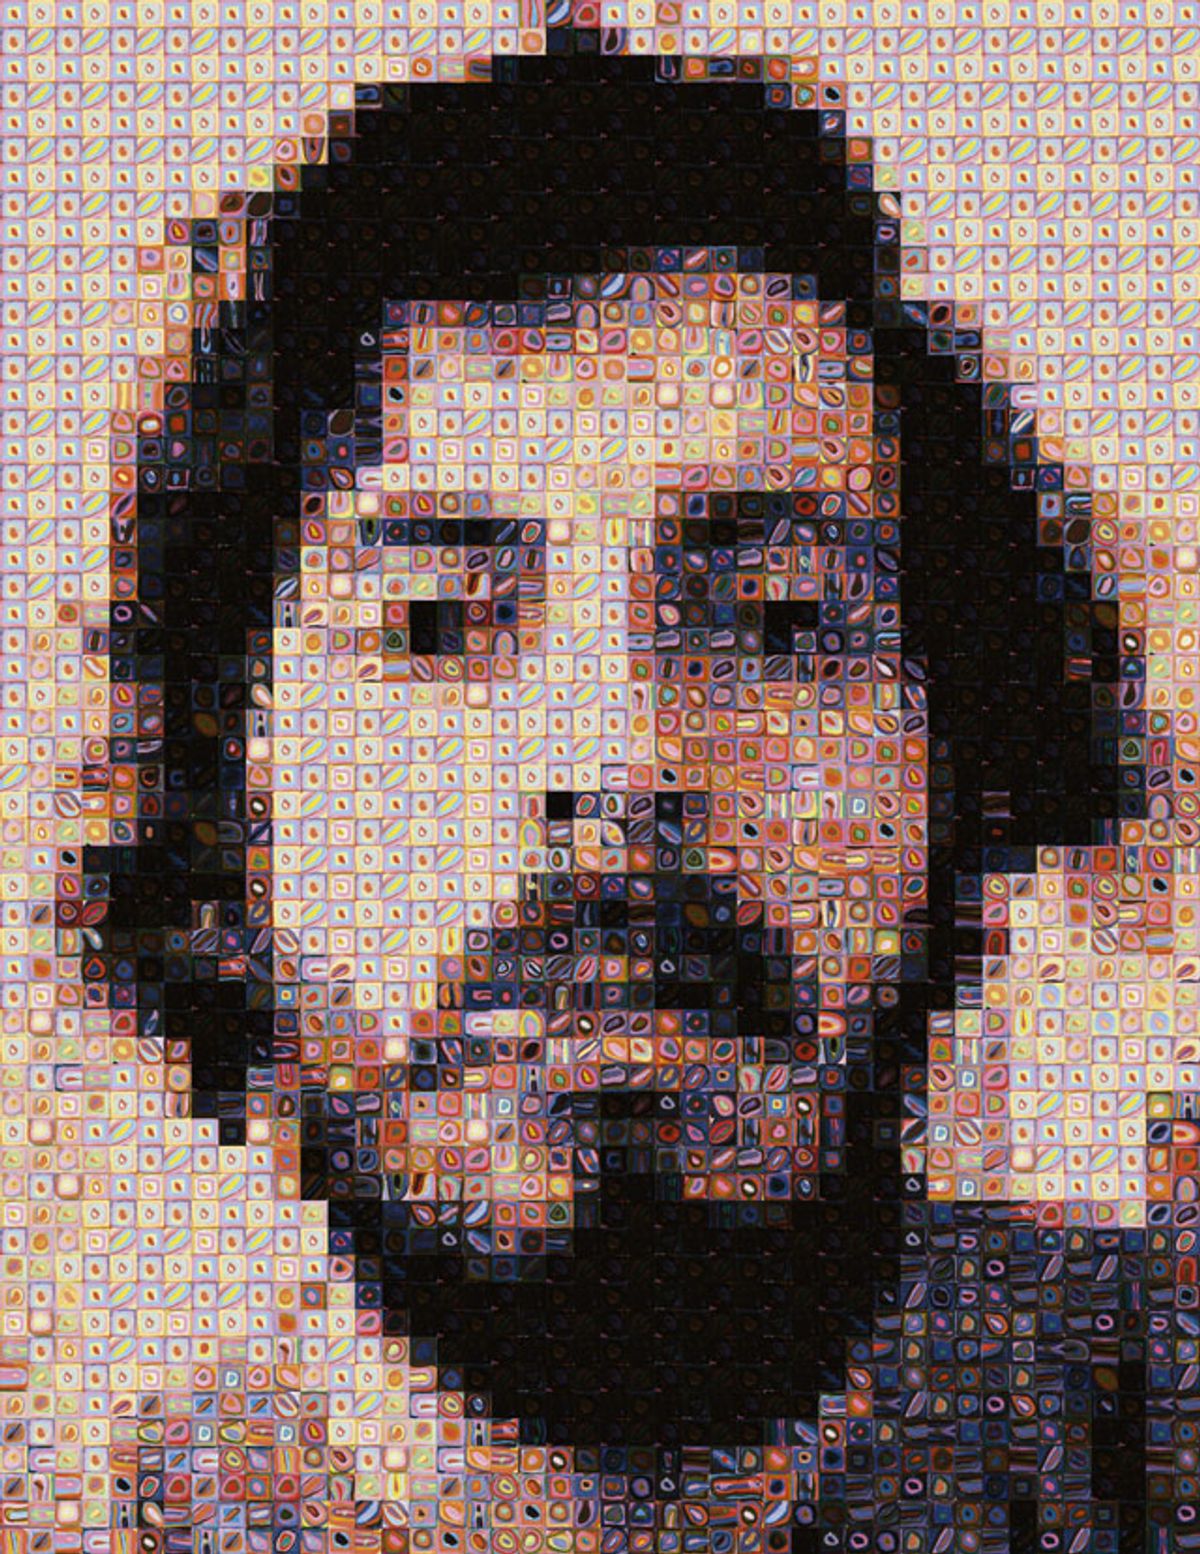 Scott Blake self-portrait made with color tiles (2008)<a href="
http://media.salon.com/2012/07/Scott_Blake_Self_Portrait_2_full3.jpg" target="_blank"> <span style="color:#ff0000">(click to enlarge)</span>
</a>  (all images courtesy the artist)       